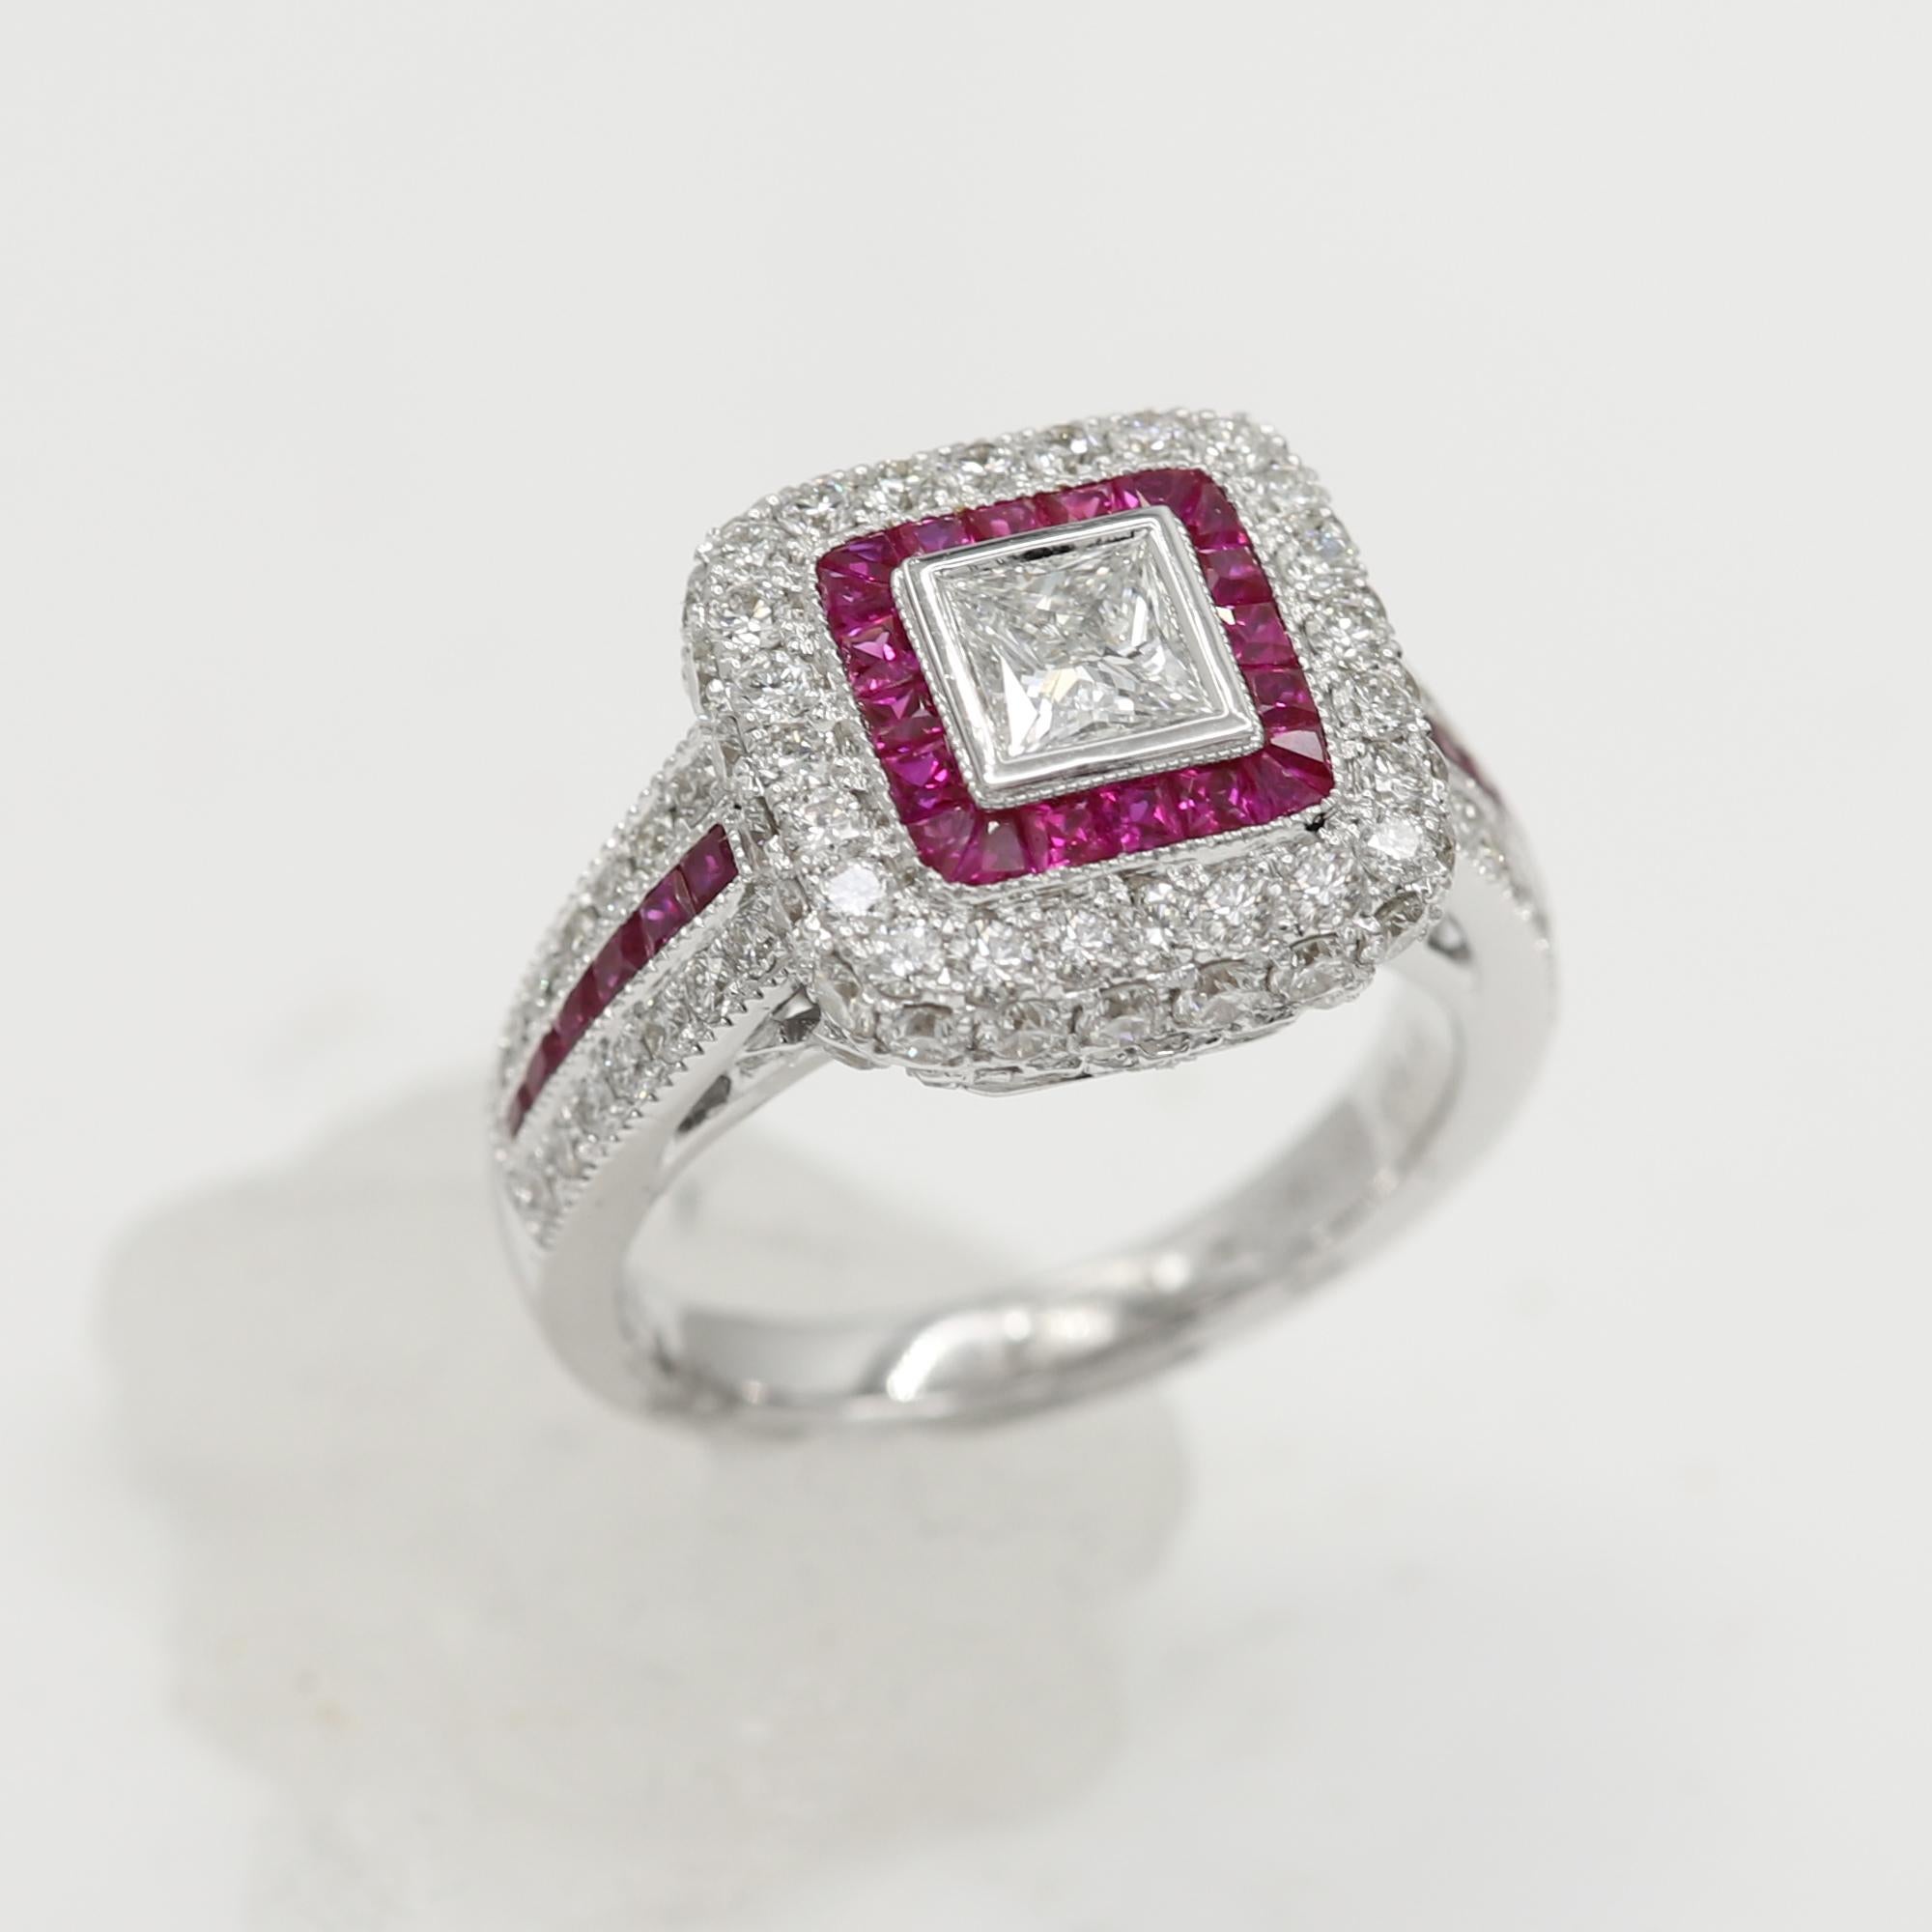 Women's Art Deco Style Ring 18 Karat White Gold Diamonds, Princess Cut and Ruby Ring For Sale